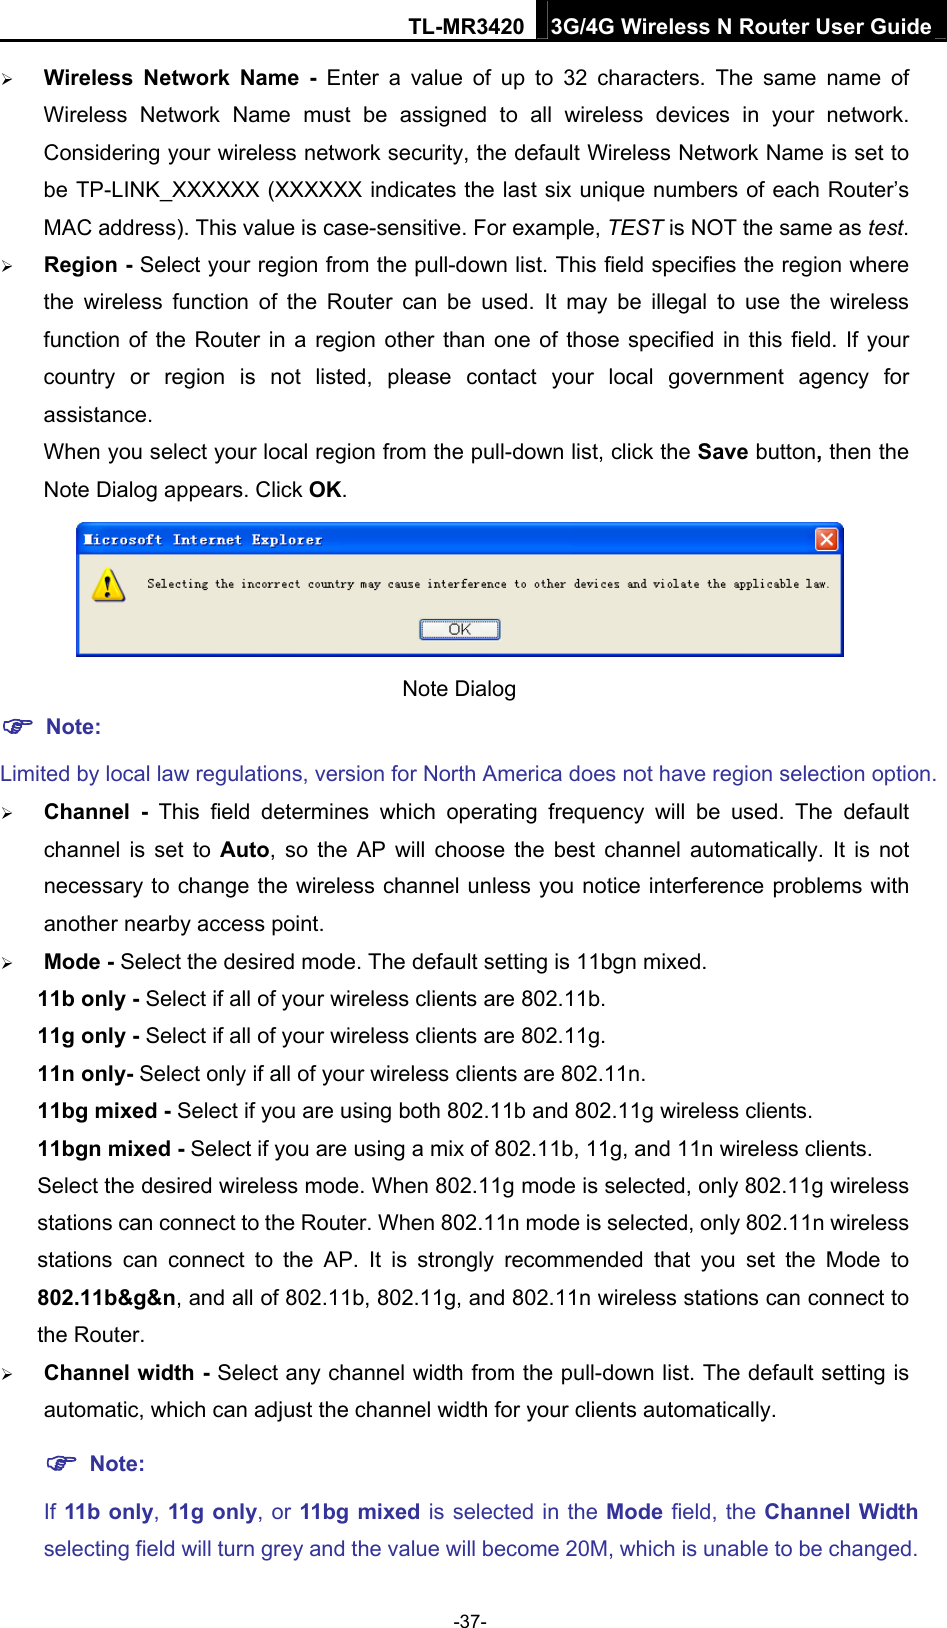 TL-MR3420 3G/4G Wireless N Router User Guide  Wireless Network Name - Enter a value of up to 32 characters. The same name of Wireless Network Name must be assigned to all wireless devices in your network. Considering your wireless network security, the default Wireless Network Name is set to be TP-LINK_XXXXXX (XXXXXX indicates the last six unique numbers of each Router’s MAC address). This value is case-sensitive. For example, TEST is NOT the same as test.  Region - Select your region from the pull-down list. This field specifies the region where the wireless function of the Router can be used. It may be illegal to use the wireless function of the Router in a region other than one of those specified in this field. If your country or region is not listed, please contact your local government agency for assistance. When you select your local region from the pull-down list, click the Save button, then the Note Dialog appears. Click OK.  Note Dialog    Note: Limited by local law regulations, version for North America does not have region selection option.  Channel - This field determines which operating frequency will be used. The default channel is set to Auto, so the AP will choose the best channel automatically. It is not necessary to change the wireless channel unless you notice interference problems with another nearby access point.  Mode - Select the desired mode. The default setting is 11bgn mixed. 11b only - Select if all of your wireless clients are 802.11b. 11g only - Select if all of your wireless clients are 802.11g. 11n only- Select only if all of your wireless clients are 802.11n. 11bg mixed - Select if you are using both 802.11b and 802.11g wireless clients. 11bgn mixed - Select if you are using a mix of 802.11b, 11g, and 11n wireless clients. Select the desired wireless mode. When 802.11g mode is selected, only 802.11g wireless stations can connect to the Router. When 802.11n mode is selected, only 802.11n wireless stations can connect to the AP. It is strongly recommended that you set the Mode to 802.11b&amp;g&amp;n, and all of 802.11b, 802.11g, and 802.11n wireless stations can connect to the Router.  Channel width - Select any channel width from the pull-down list. The default setting is automatic, which can adjust the channel width for your clients automatically.  Note: If 11b only, 11g only, or 11bg mixed is selected in the Mode field, the Channel Width selecting field will turn grey and the value will become 20M, which is unable to be changed.   -37- 